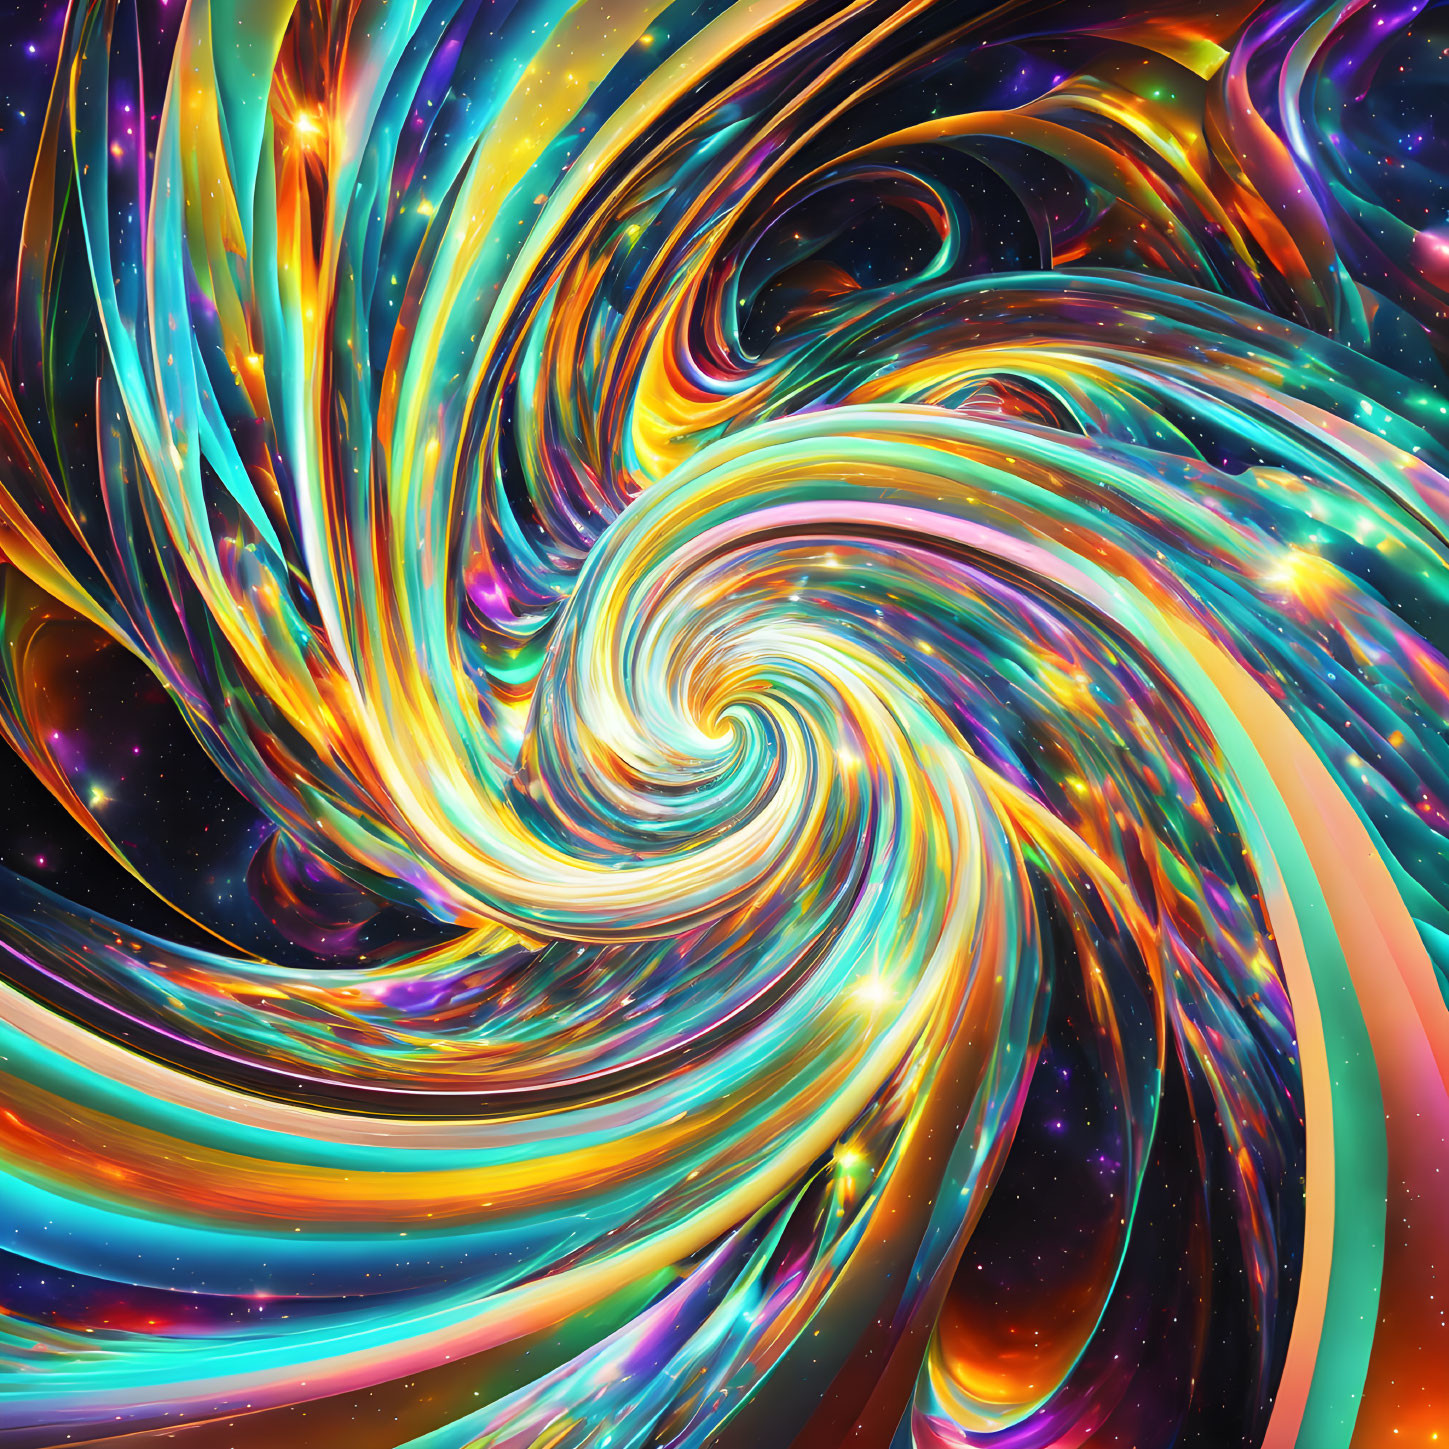 Colorful digital art: Swirling colors blend with cosmic elements